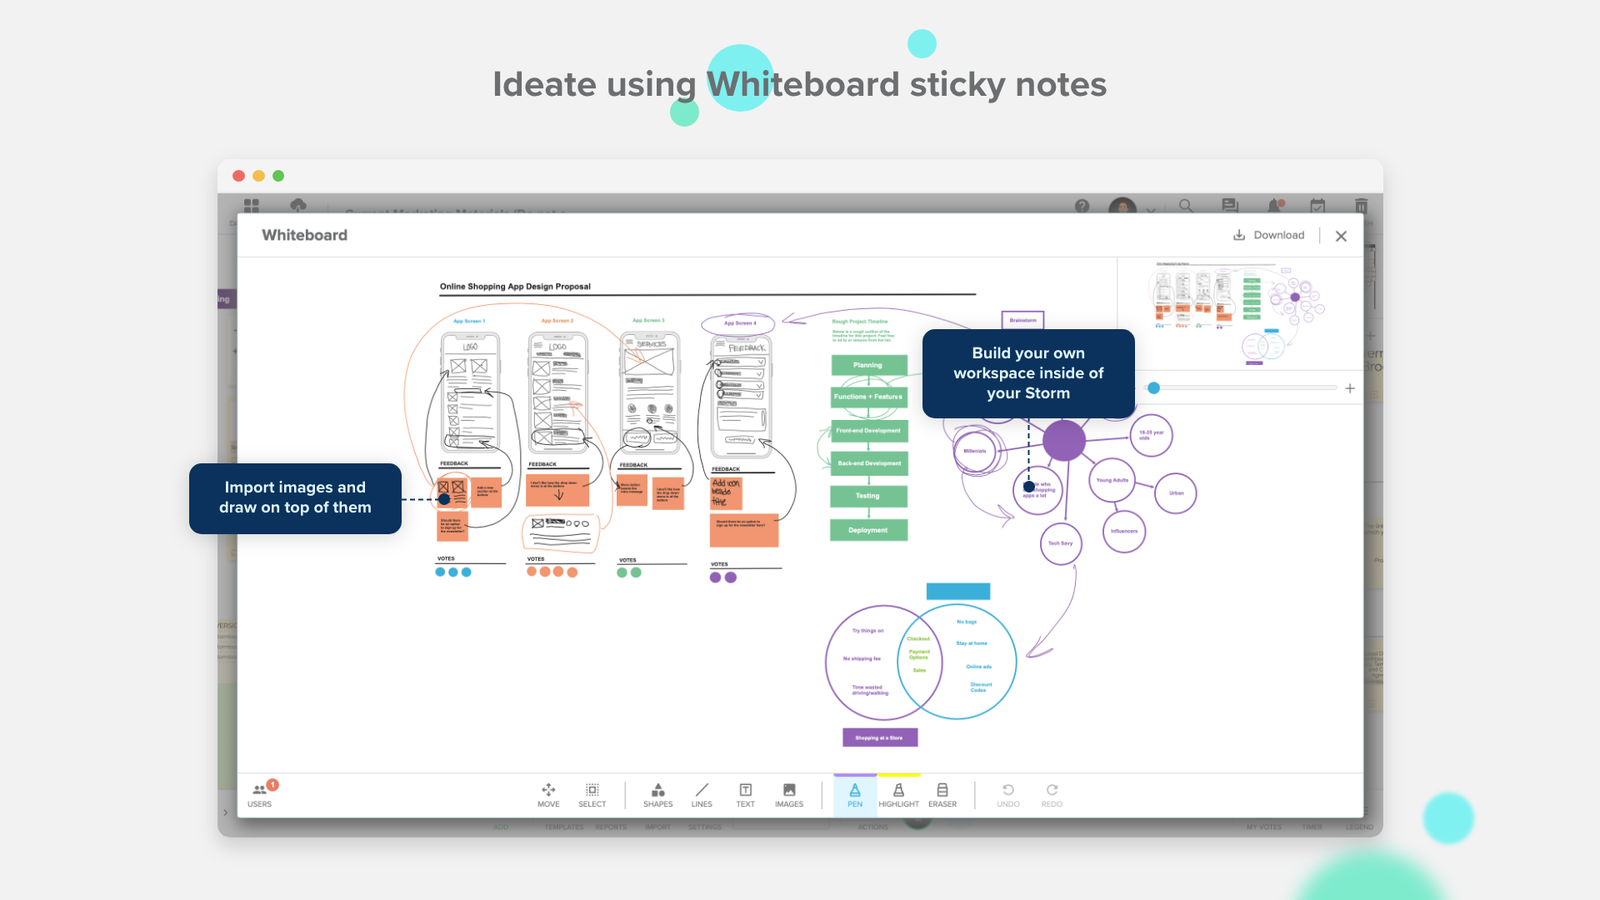 Ideate using Whiteboard sticky notes